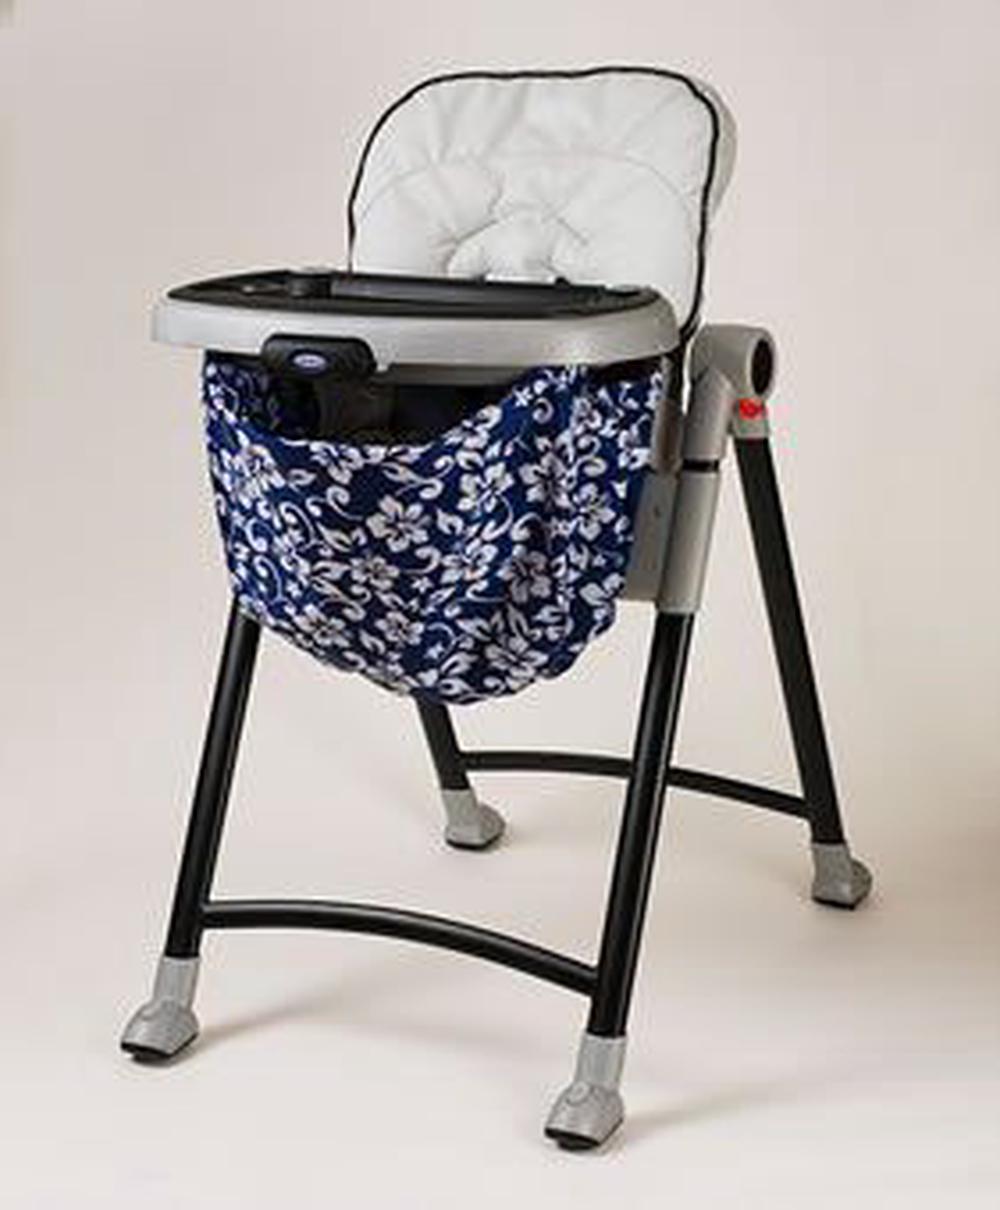 Wupzey High Chair Food Catcher Buy Online At The Nile